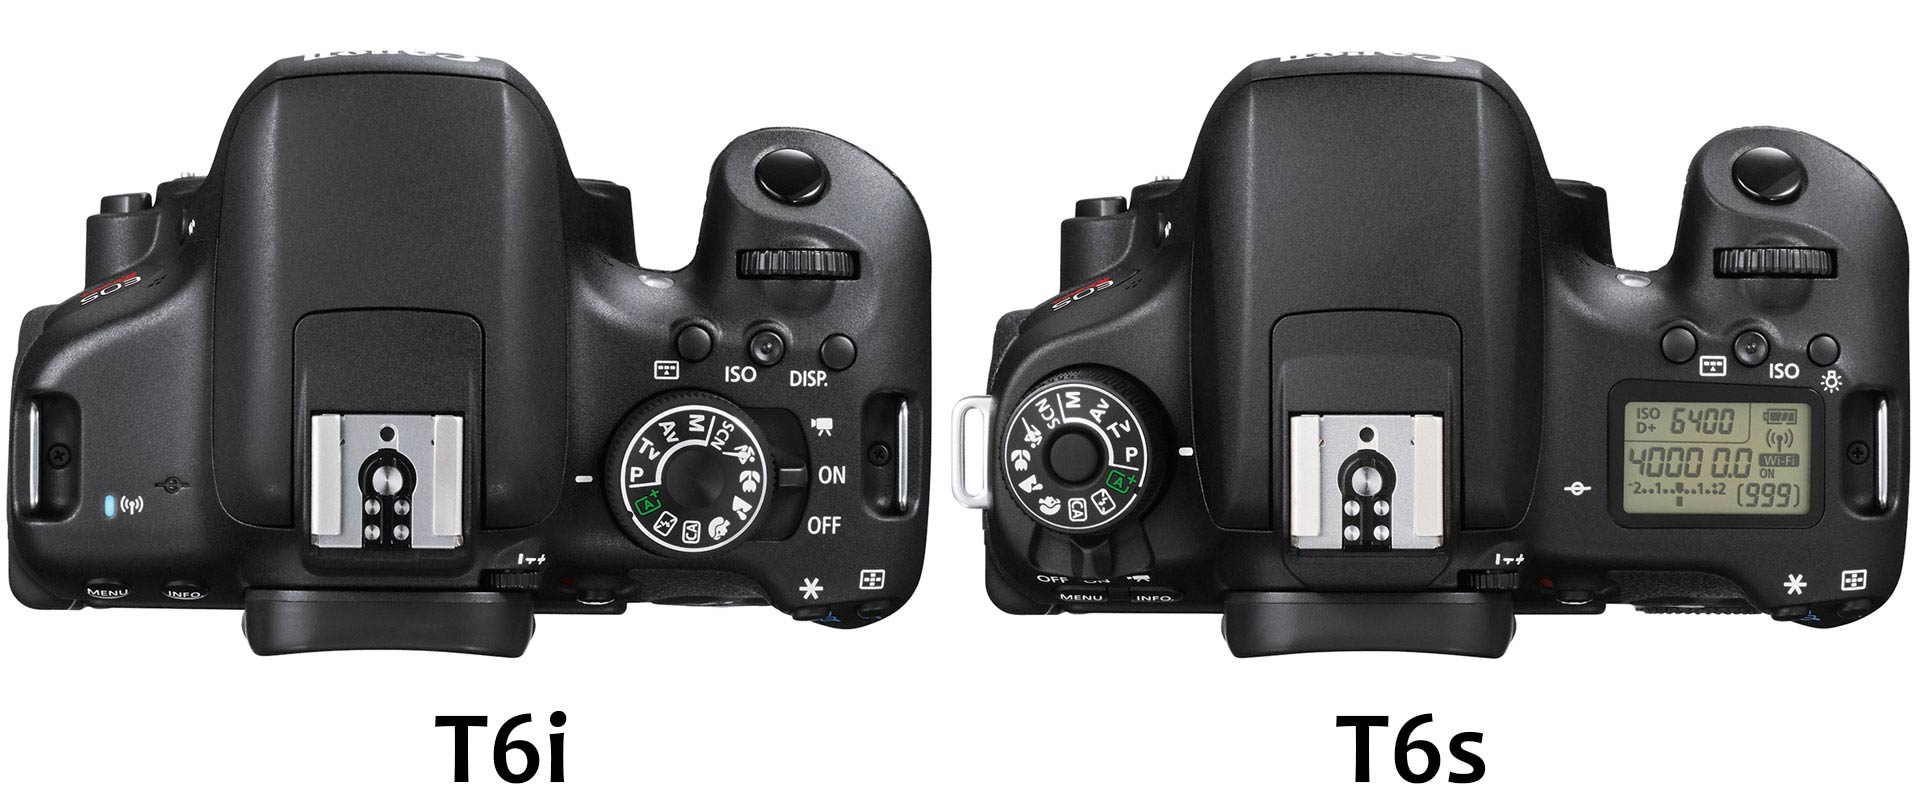 The Canon T6i and T6s top panels.